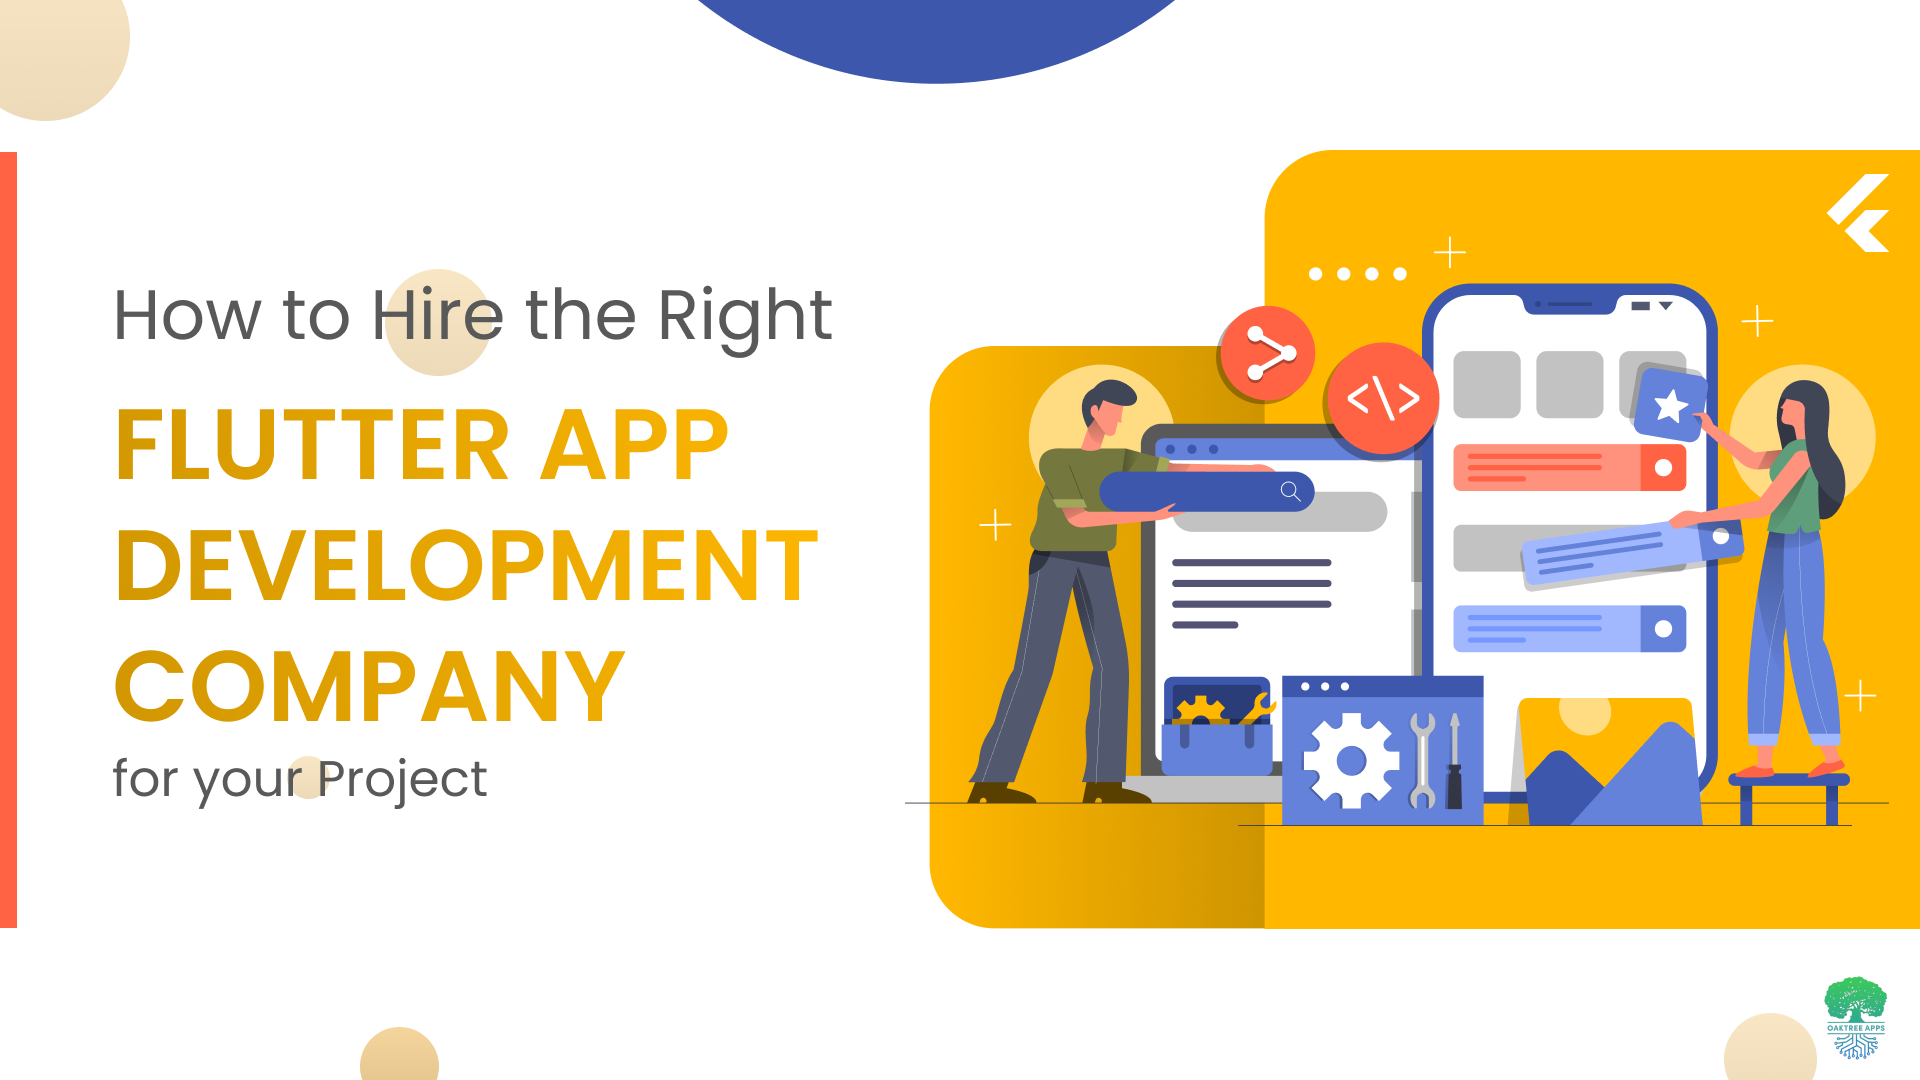 How_to_Hire_the_Right_Flutter_App_Development_Company.png